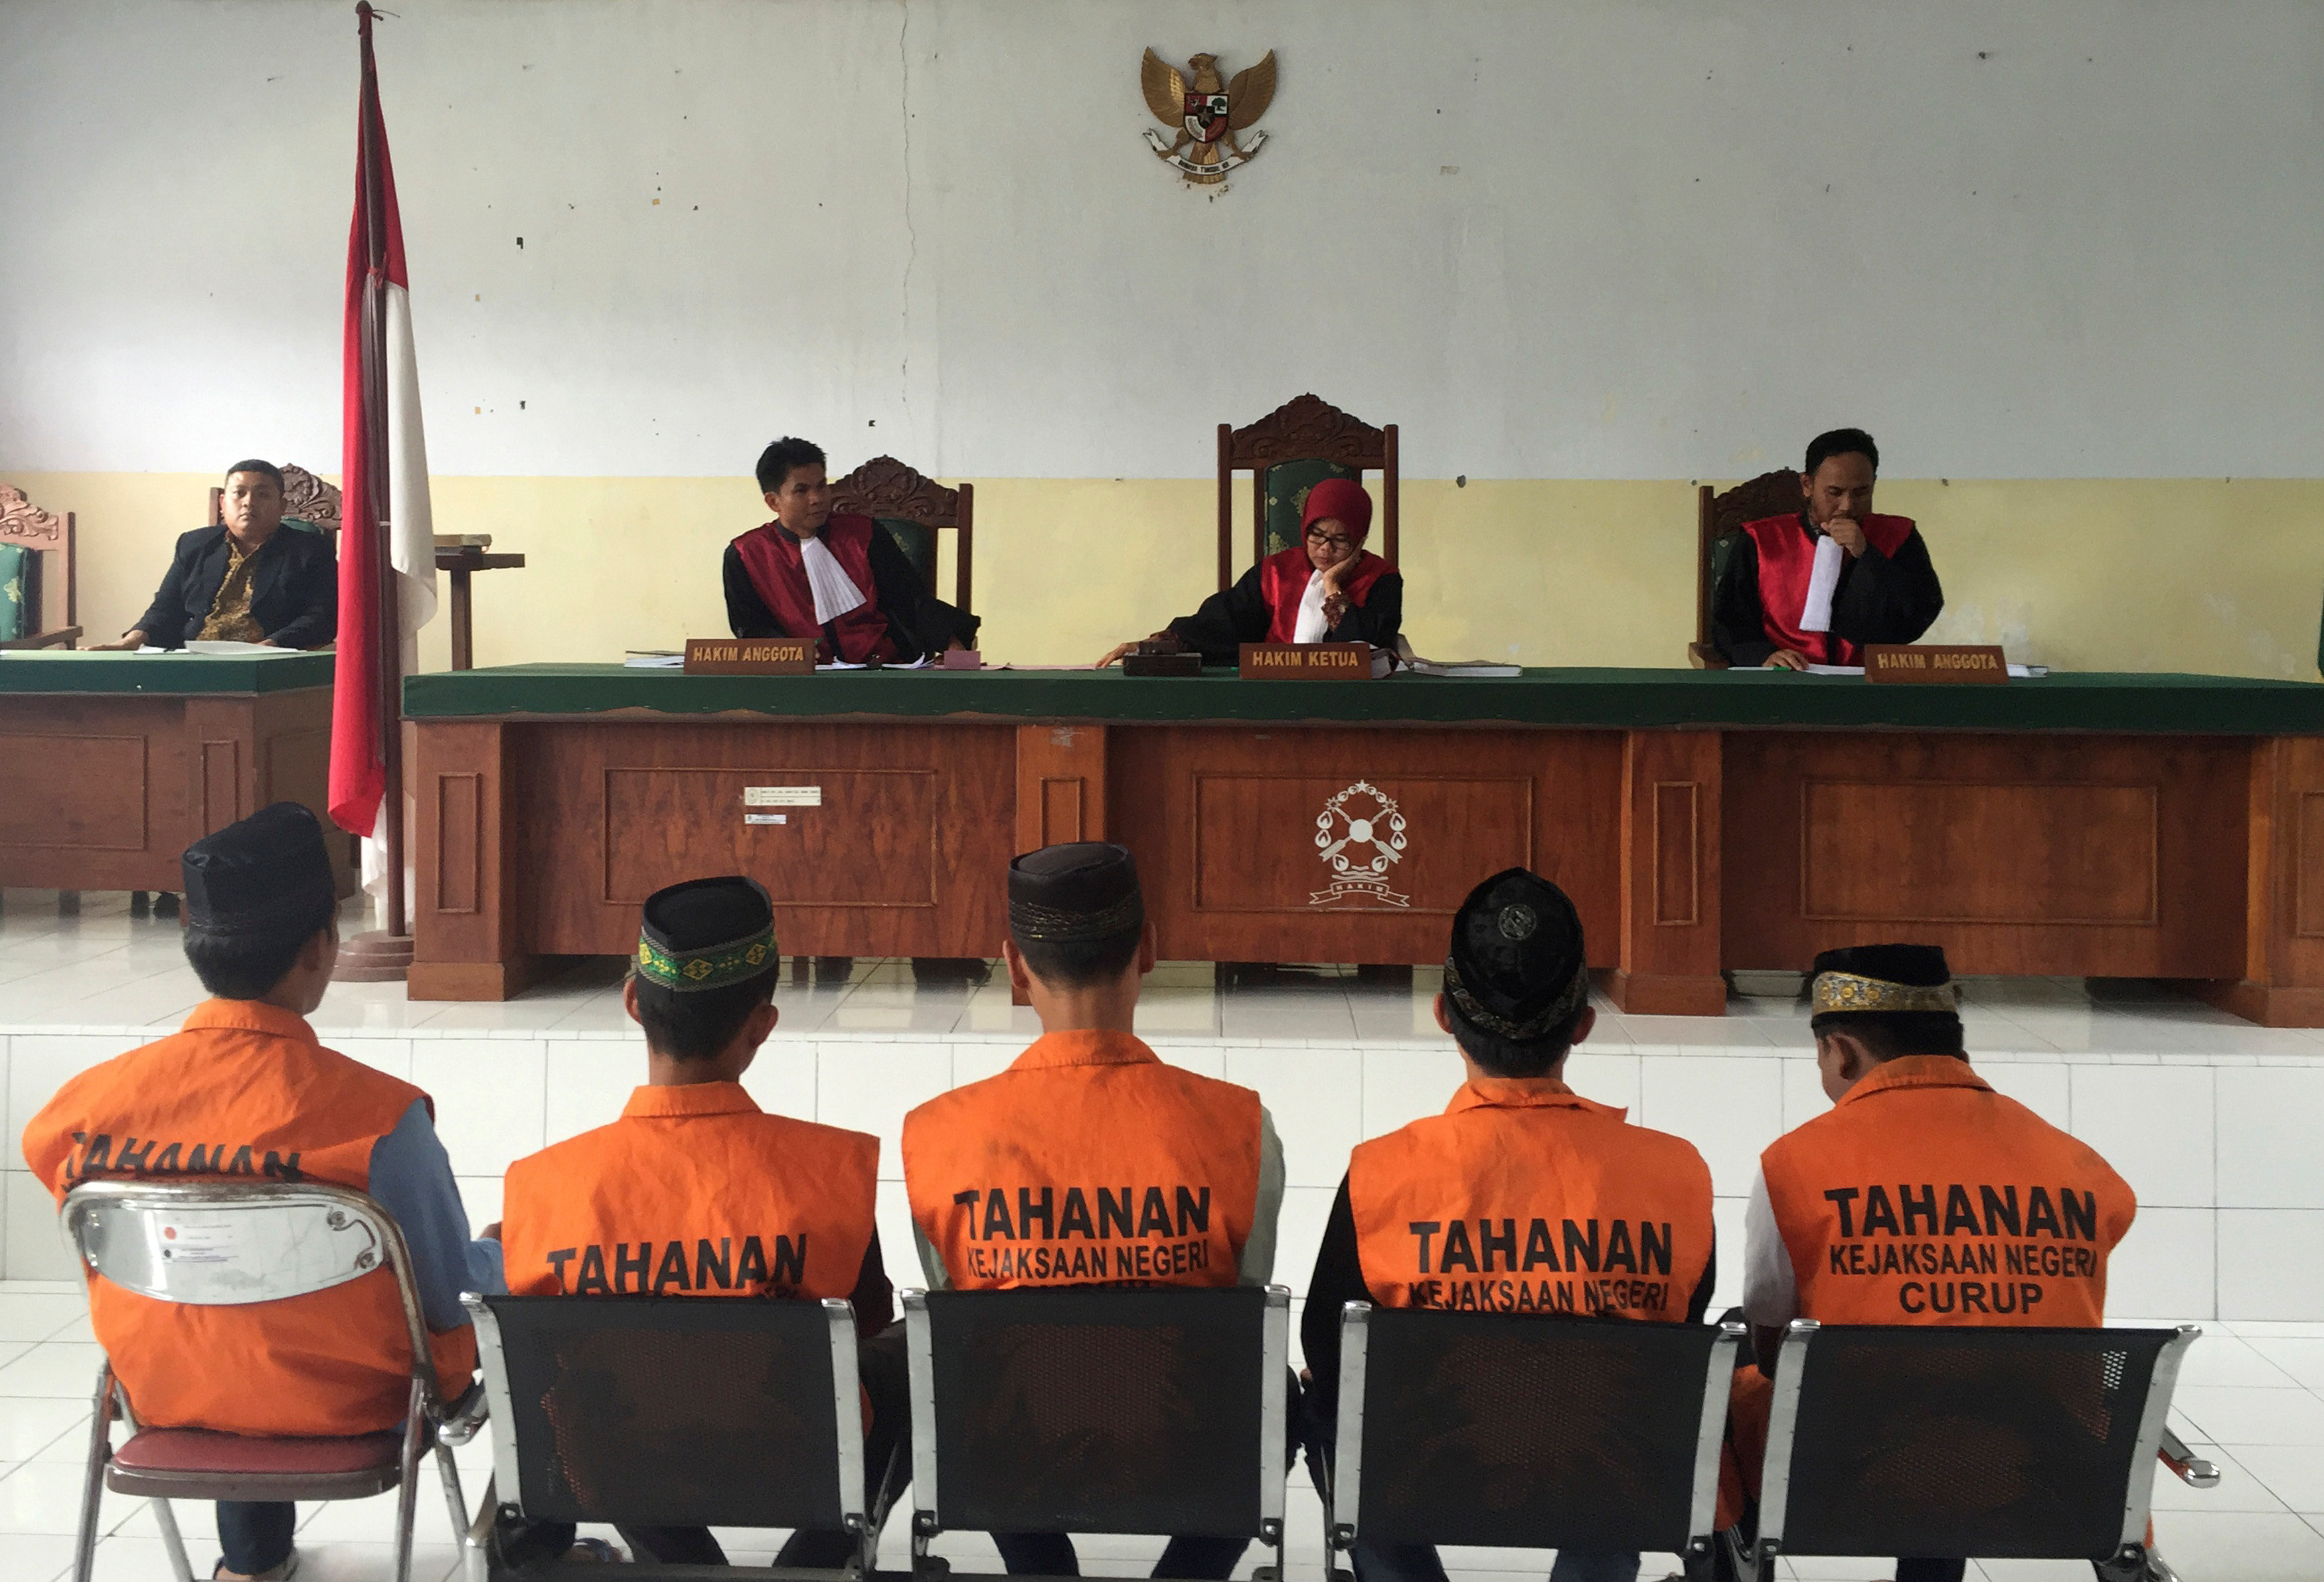 Five men, part of a gang of 14 men and boys, convicted for the rape and murder of a 14-year-old school girl, sit before judges during sentencing in Curup, near Bengkulu, on the island of Sumatra, Indonesia September 29, 2016. REUTERS/Kanupriya Kapoor